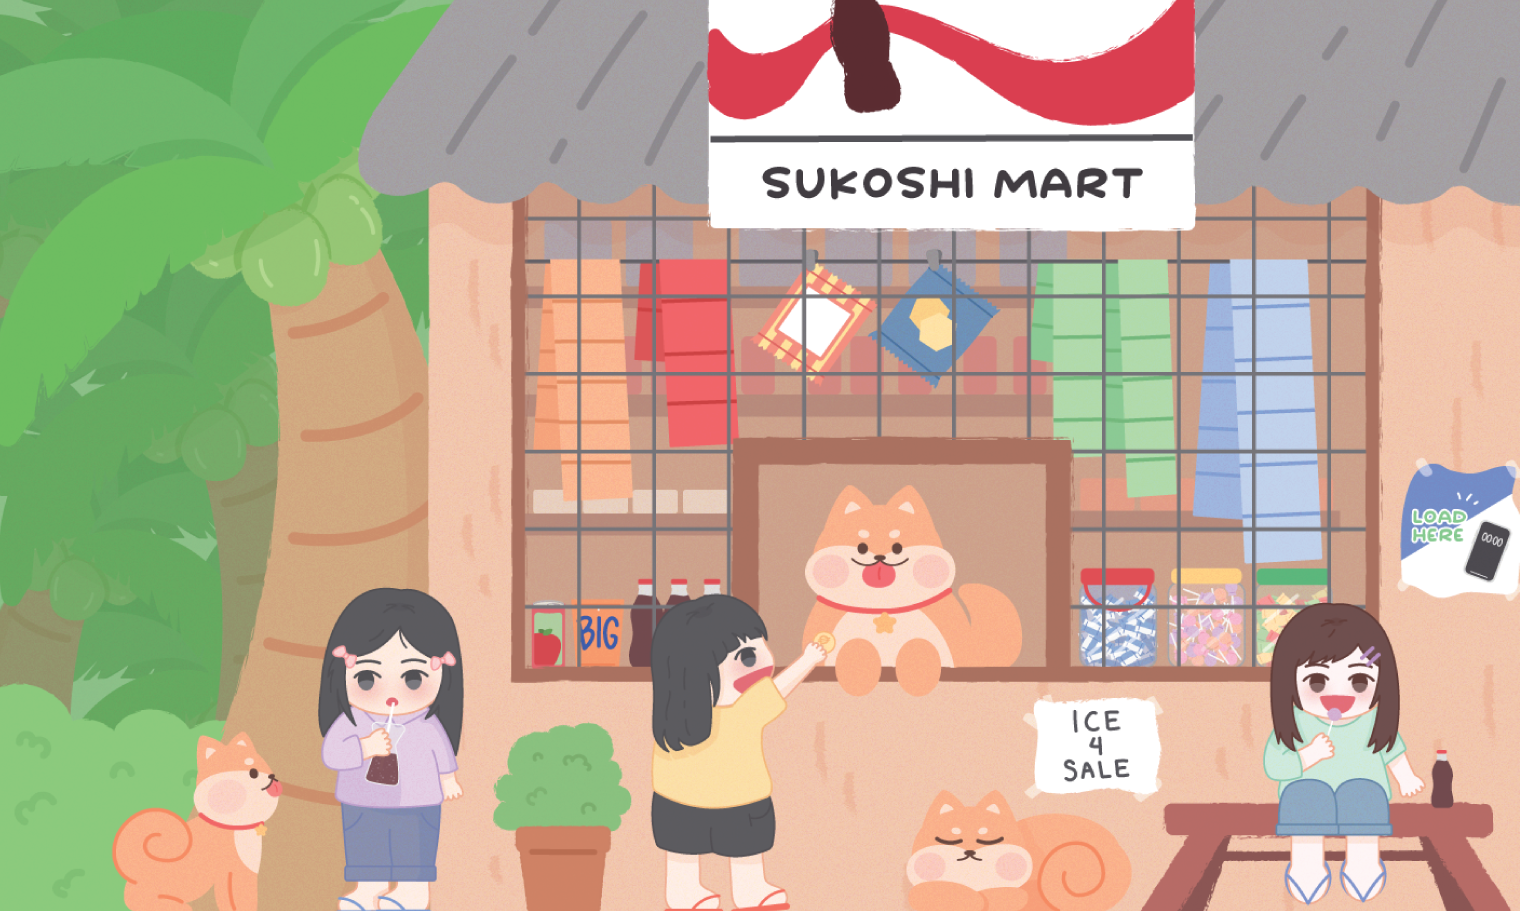 SUKOSHI MART Asian Heritage Month Postcard Featuring: “Childhood hangout spots” by mmaridesign on Instagram. It features a Filipino Sari Sari store scene and a shiba merchant